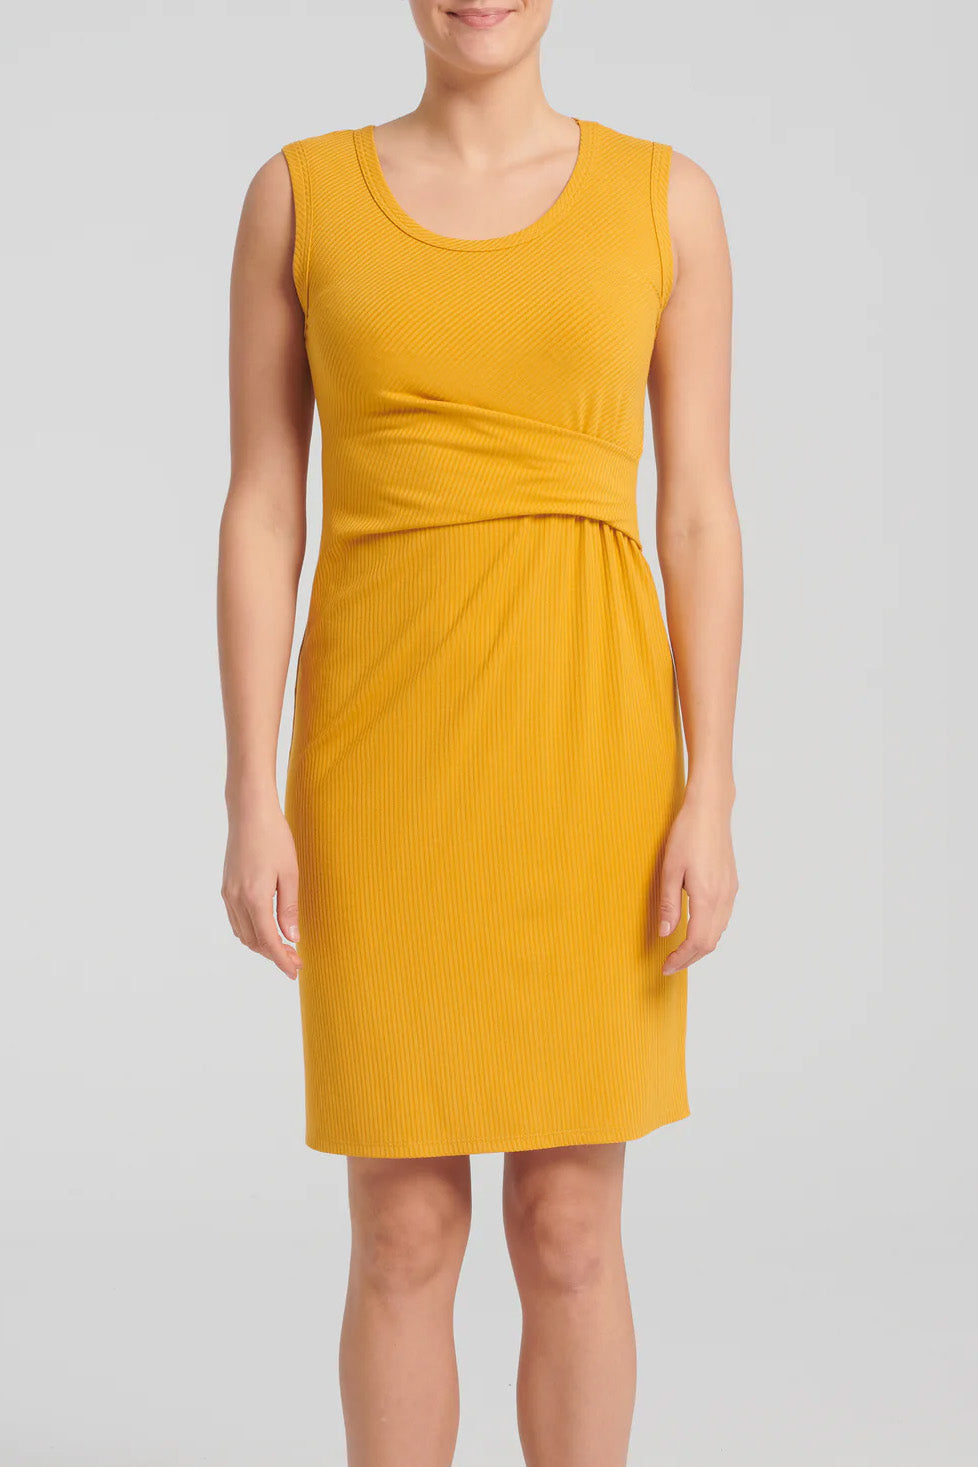 Saranya Dress by Kollontai, Topaz, sleeveless, scoop neck, wide straps, bamboo rib-knit, pleat details at waist, straight cut, knee length, sizes XS to XXL, made in Quebec